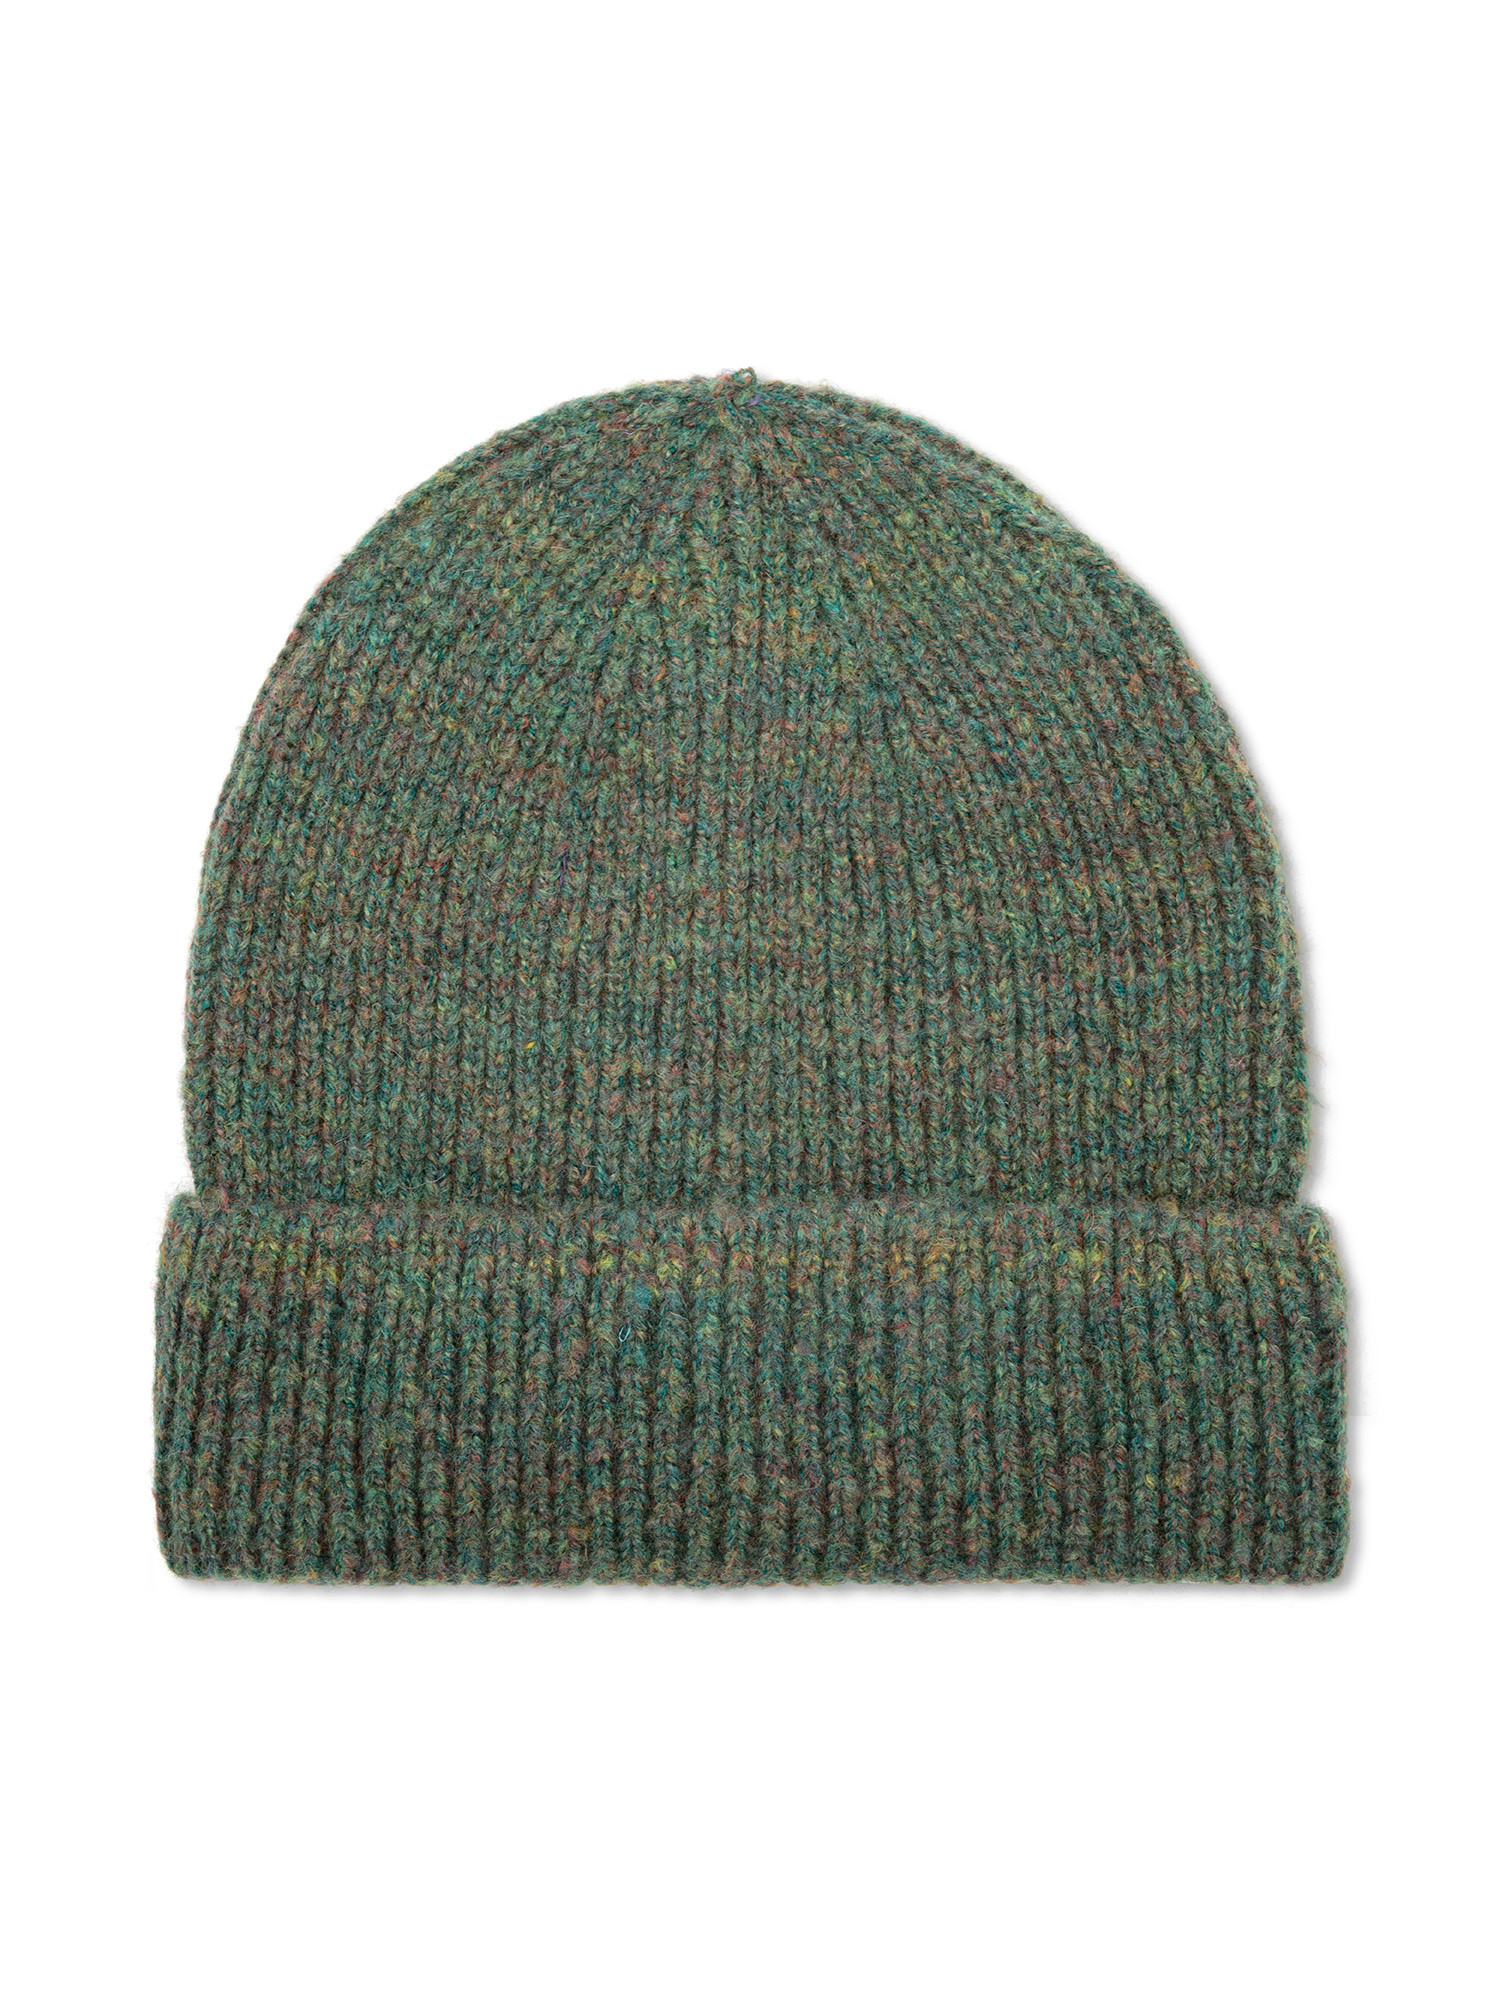 Luca D'Altieri - Ribbed beanie, Green, large image number 0